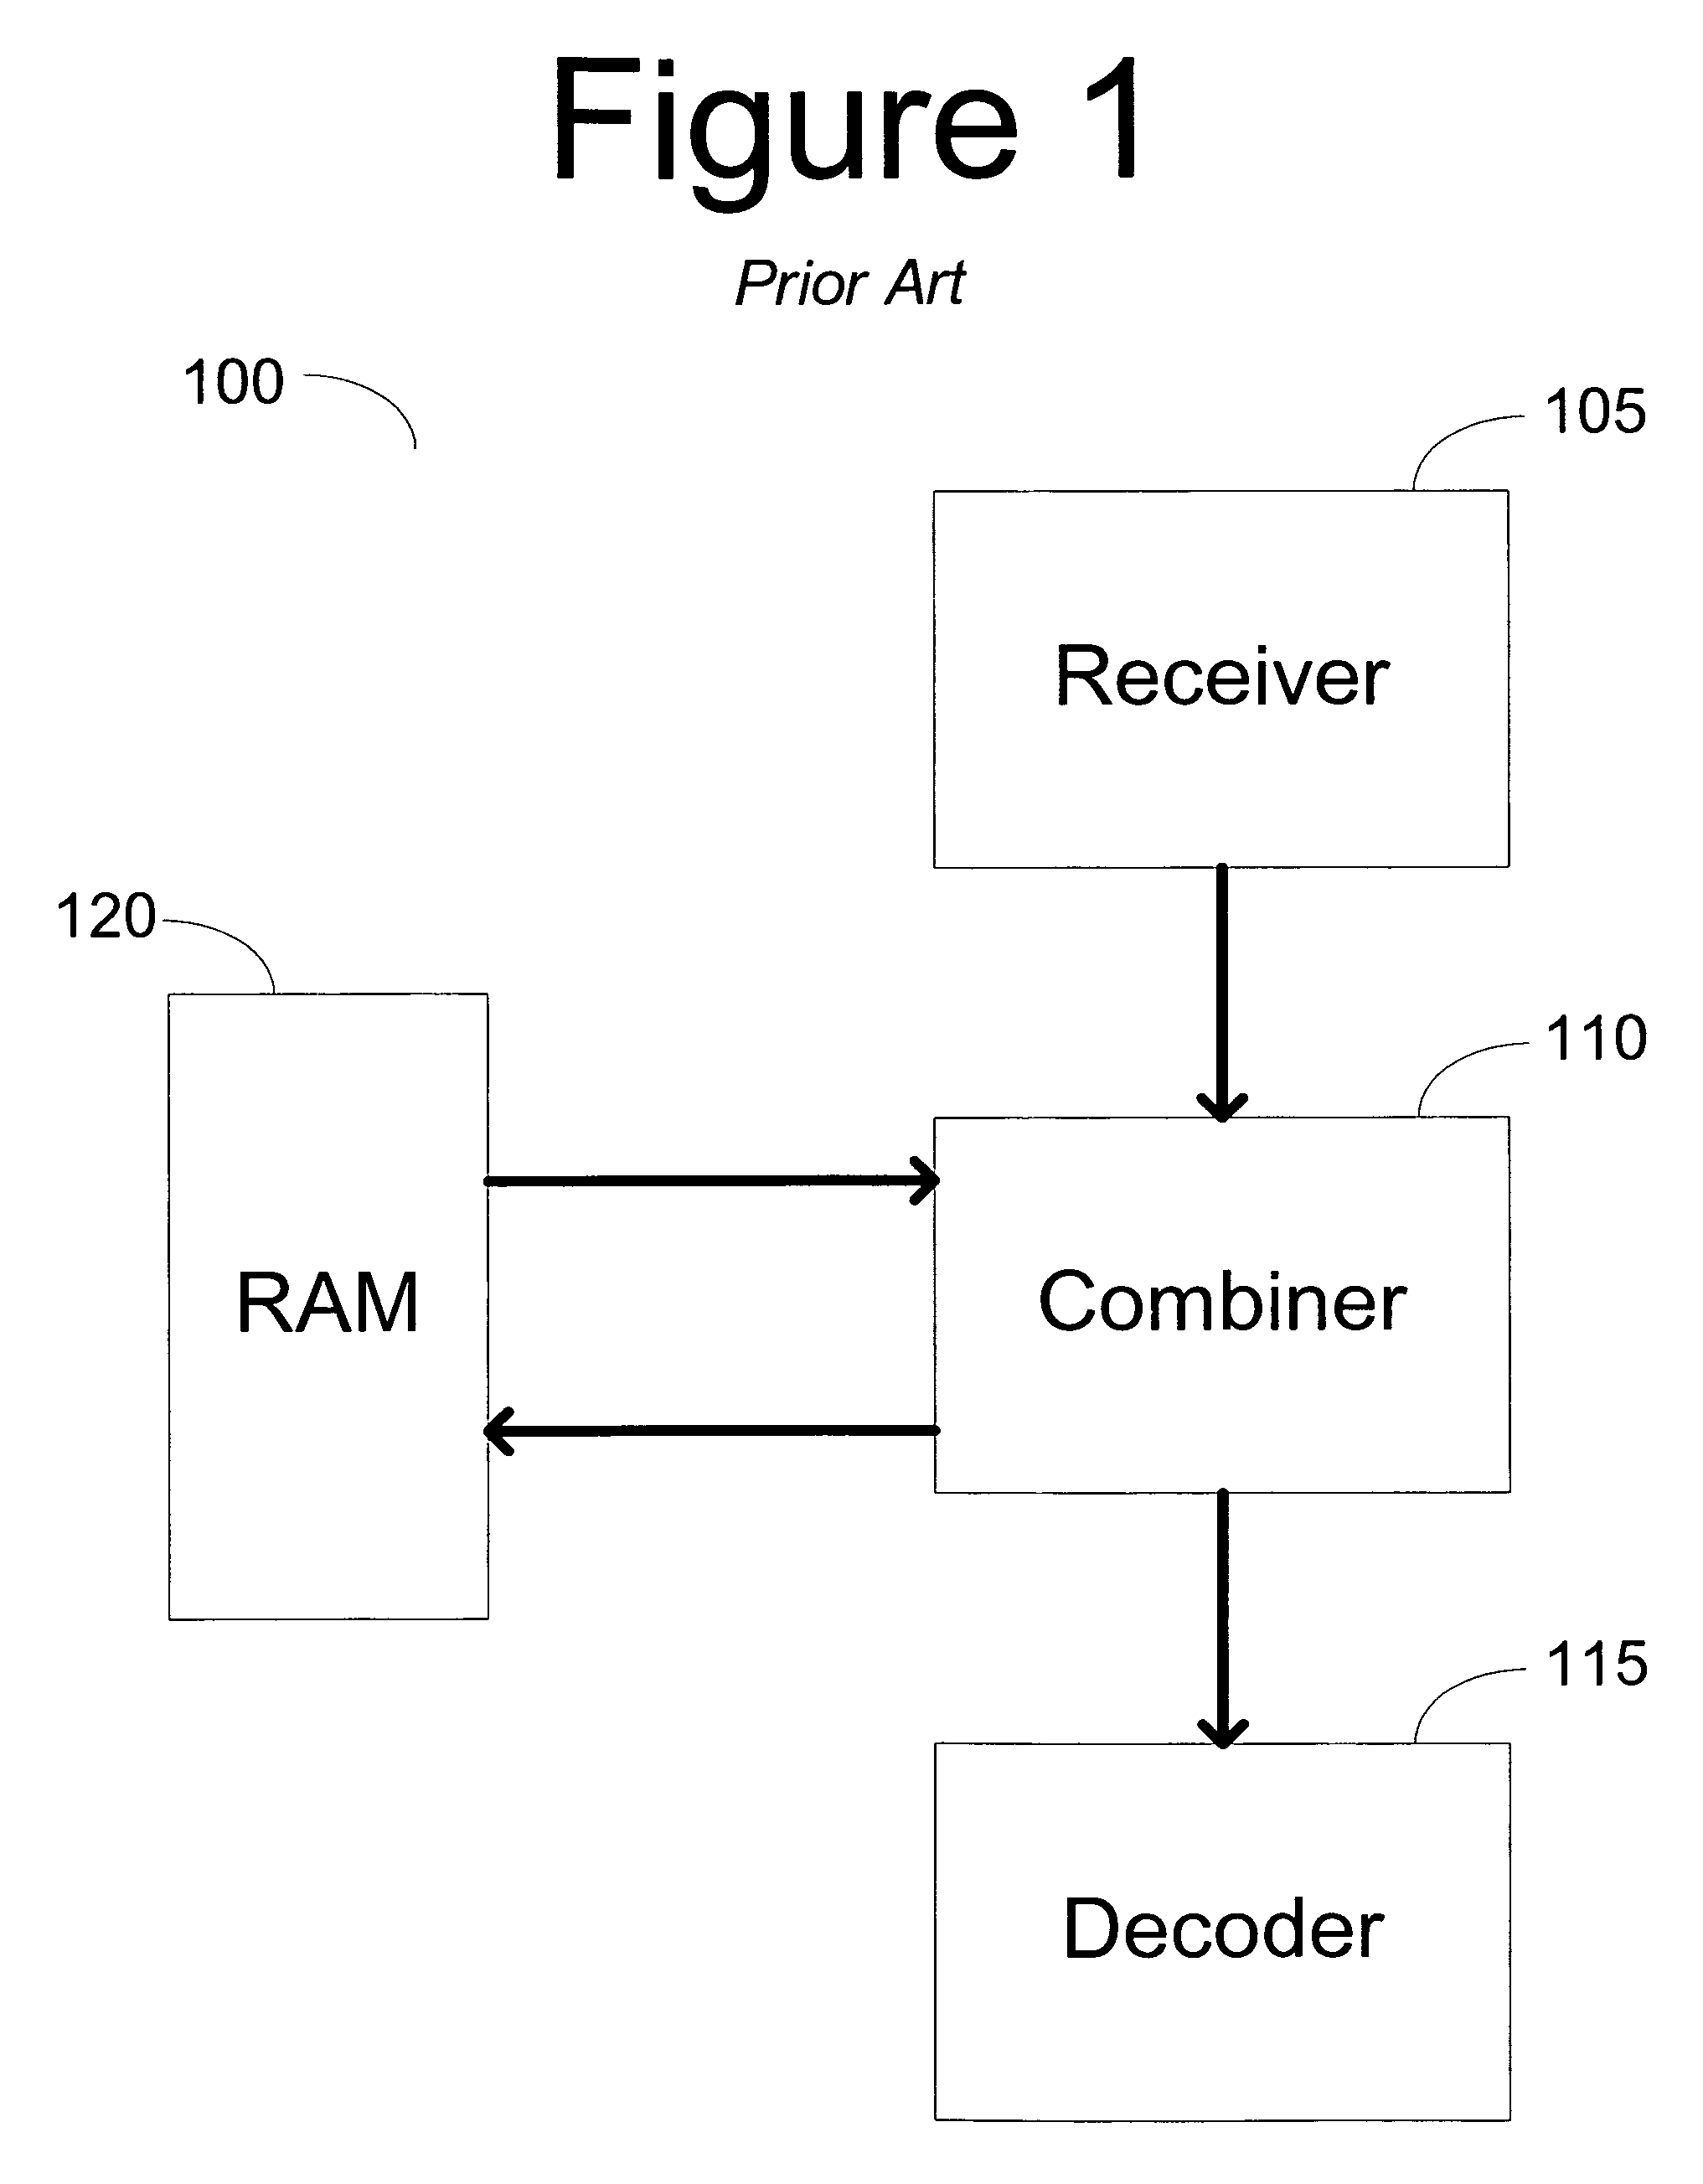 Buffer compression in automatic retransmission request (ARQ) systems